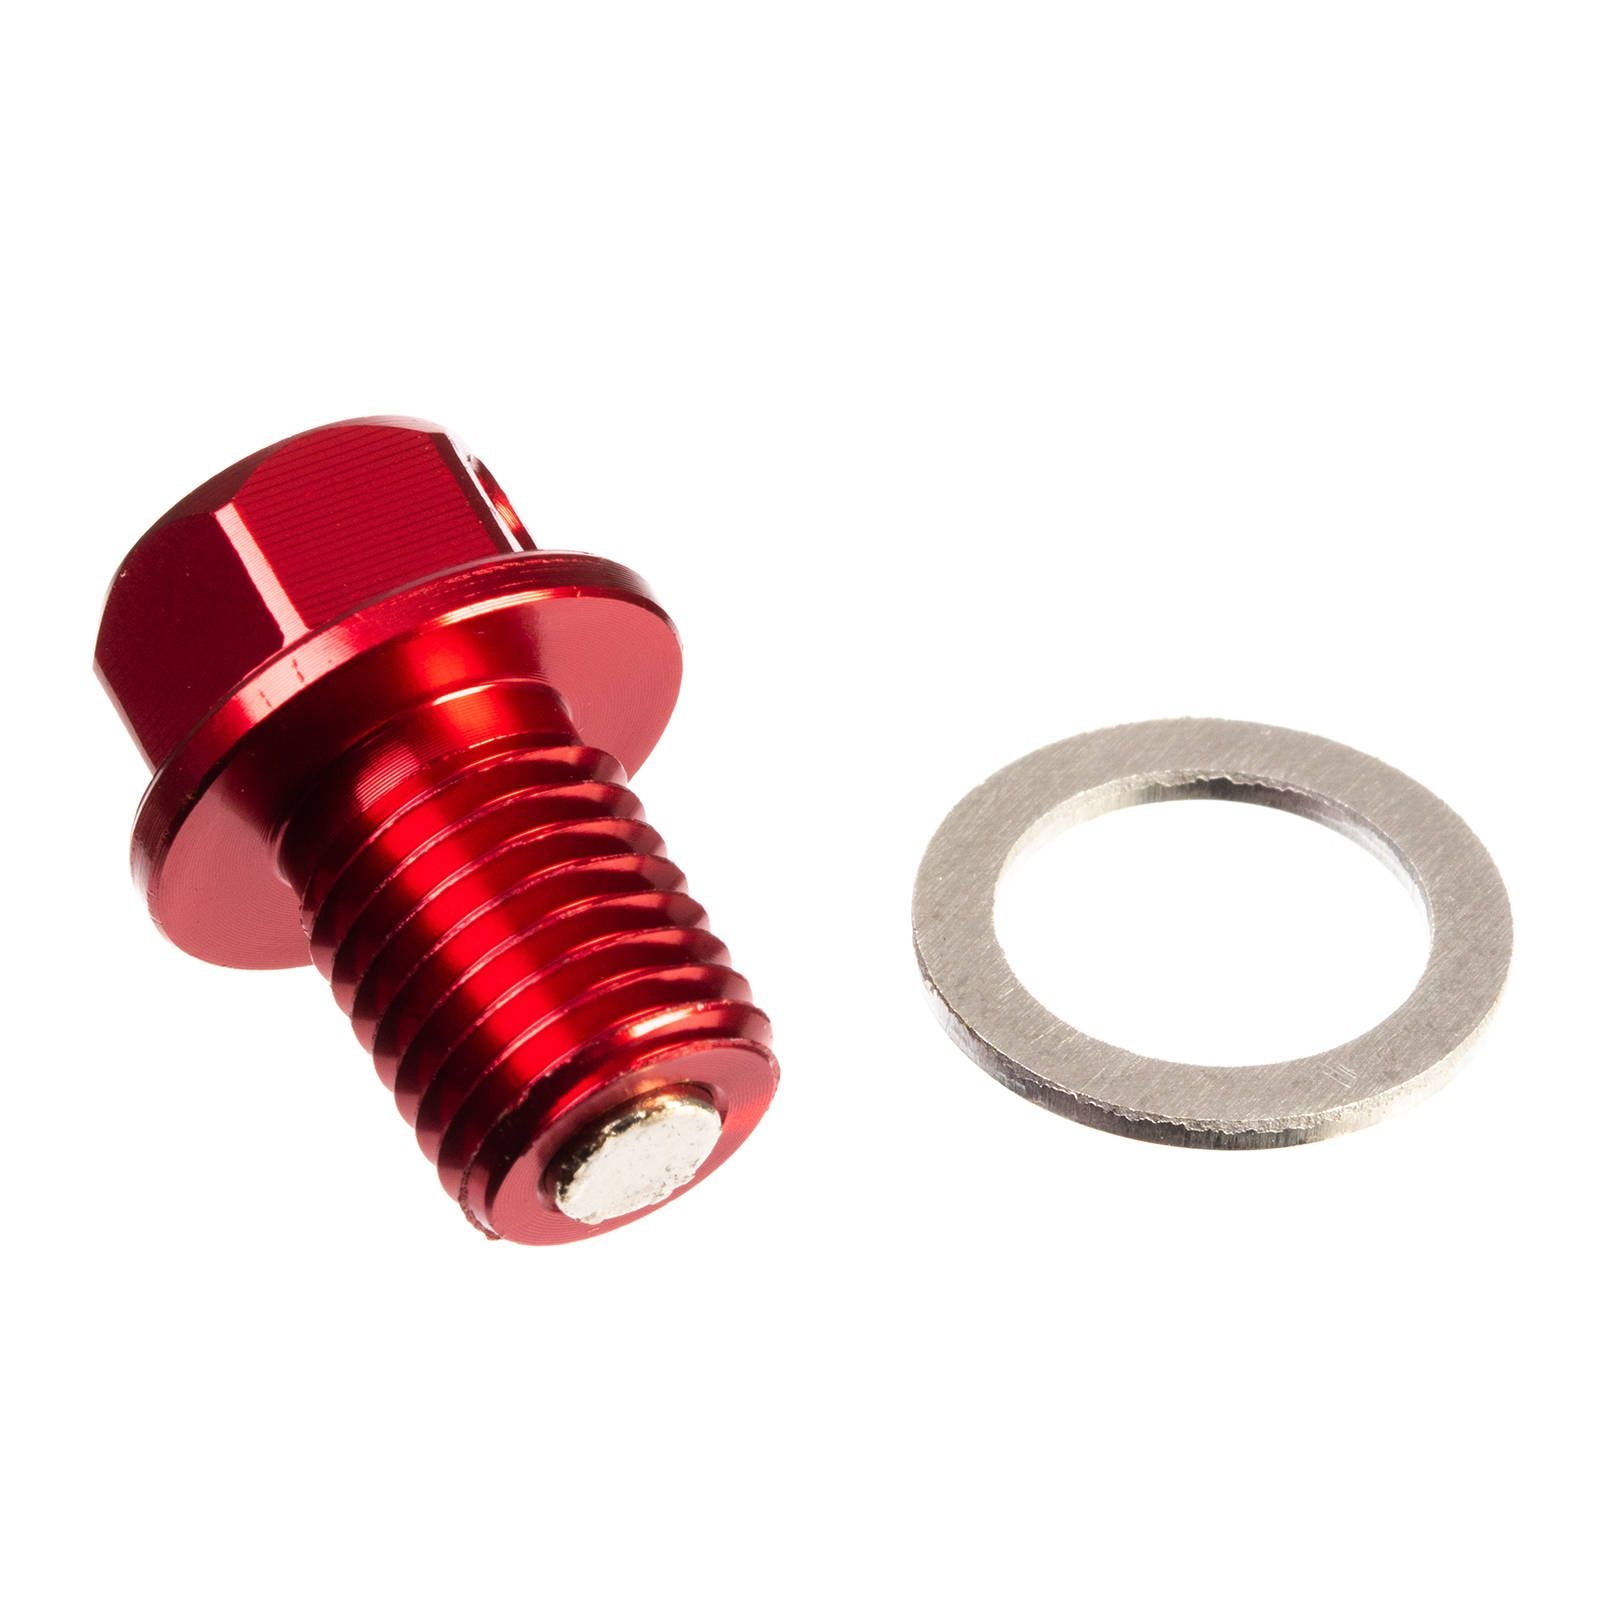 New WHITES Magnetic Sump Plug M12 x 15 x 1.5 - Red #WPMDP121515R